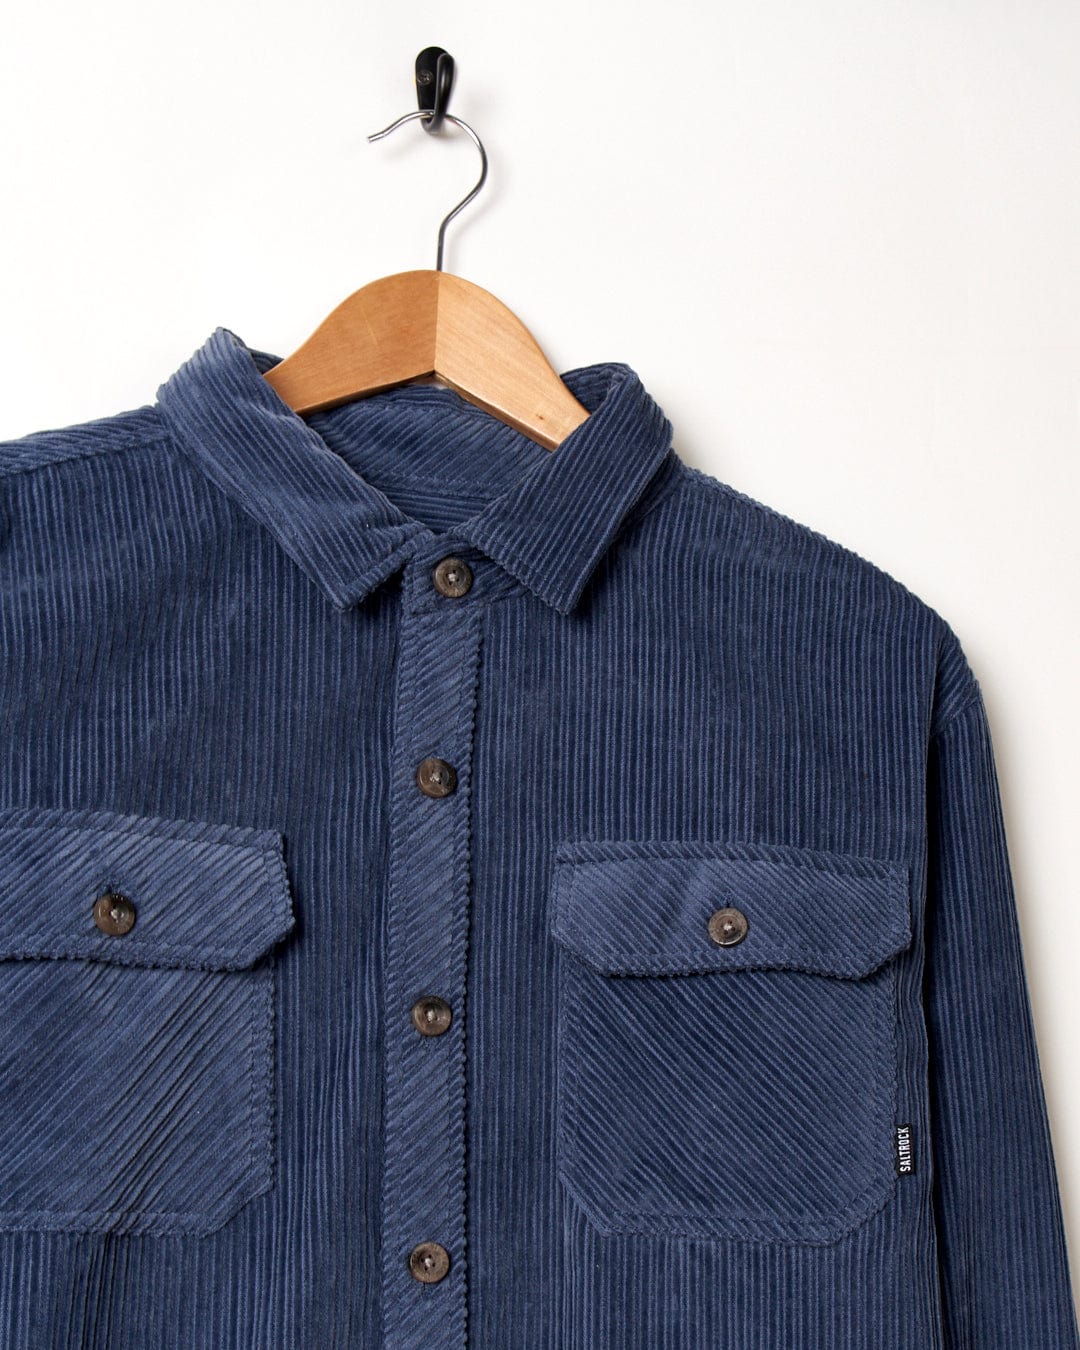 A Saltrock Ace blue corduroy shirt with front chest pockets hanging on a hanger.